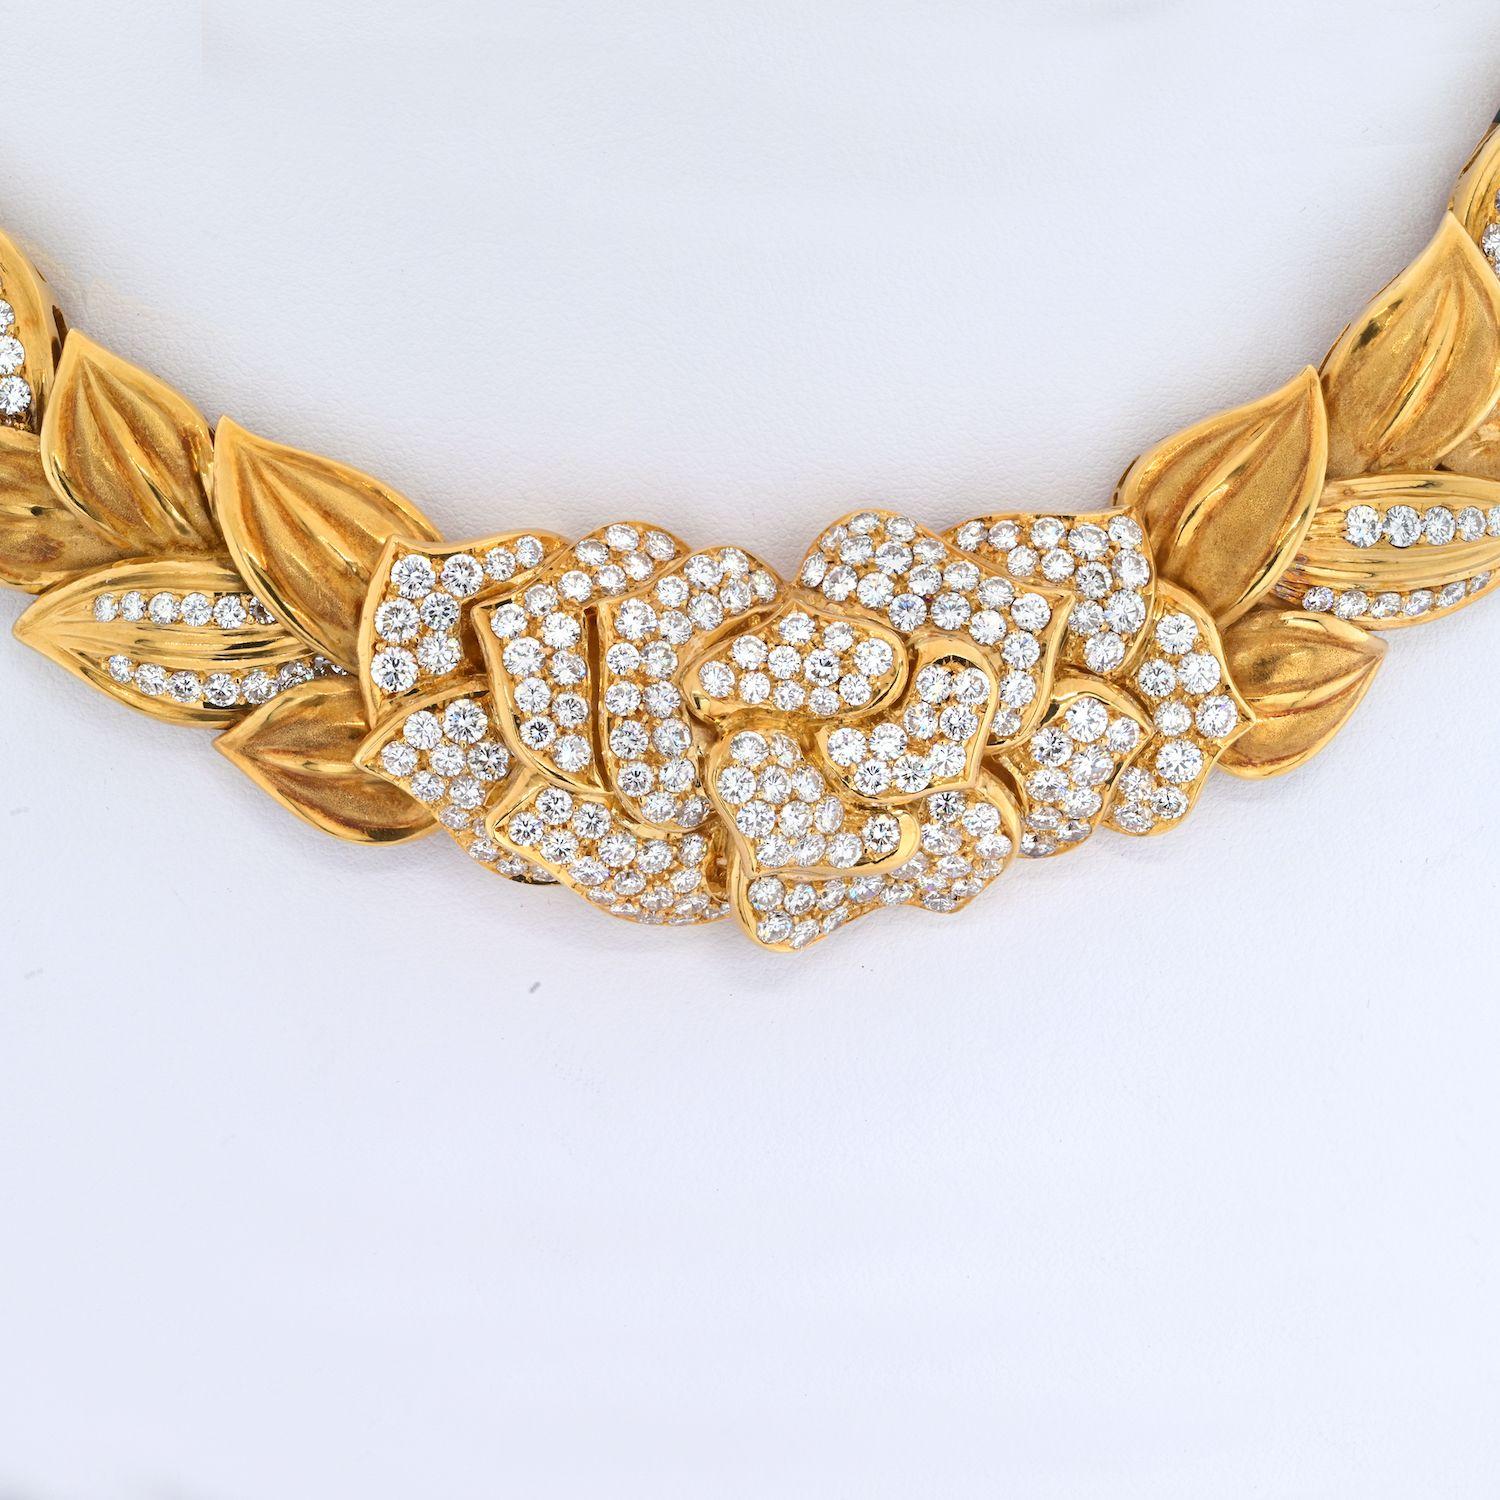 Vintage 18K Yellow Gold 18.00cts Blooming Flower Diamond Collar Necklace circa 1980's.
This is a nice and heavy necklace that fits like a collar. 
You will love the way the gold feels on your neck and shimmer of diamonds is simply divine. 
Collar